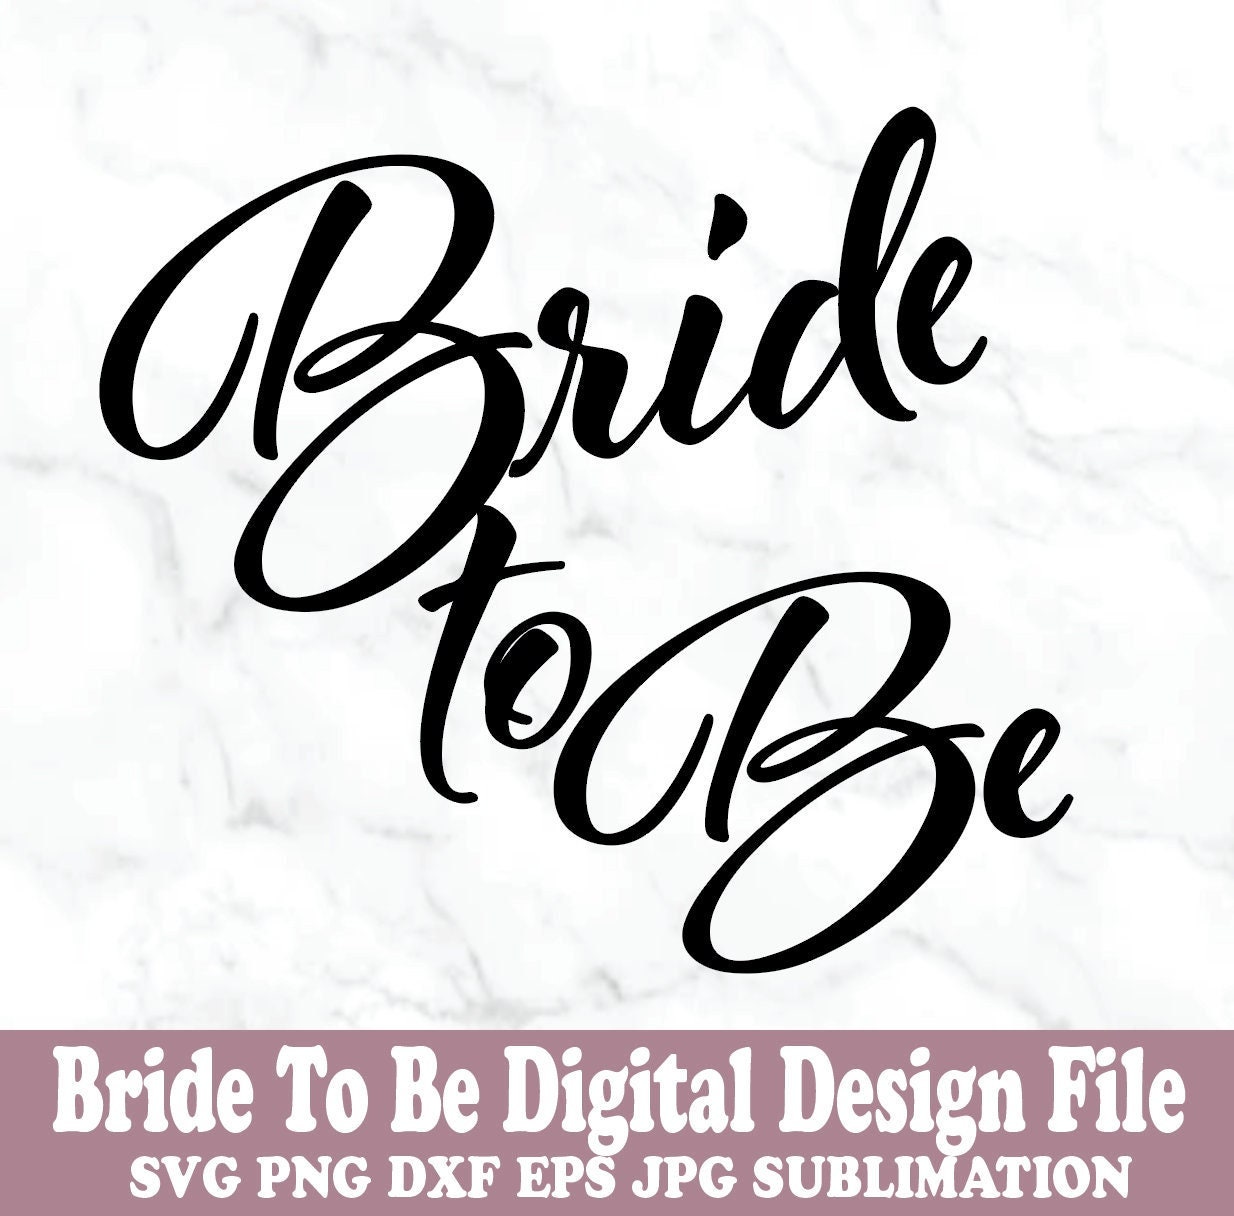 Bride To Be Svg, Marriage Svg, Bridal Party Svg. Vector Cut file for  Cricut, Silhouette, Pdf Png Eps Dxf, Decal, Sticker, Vinyl, Pin